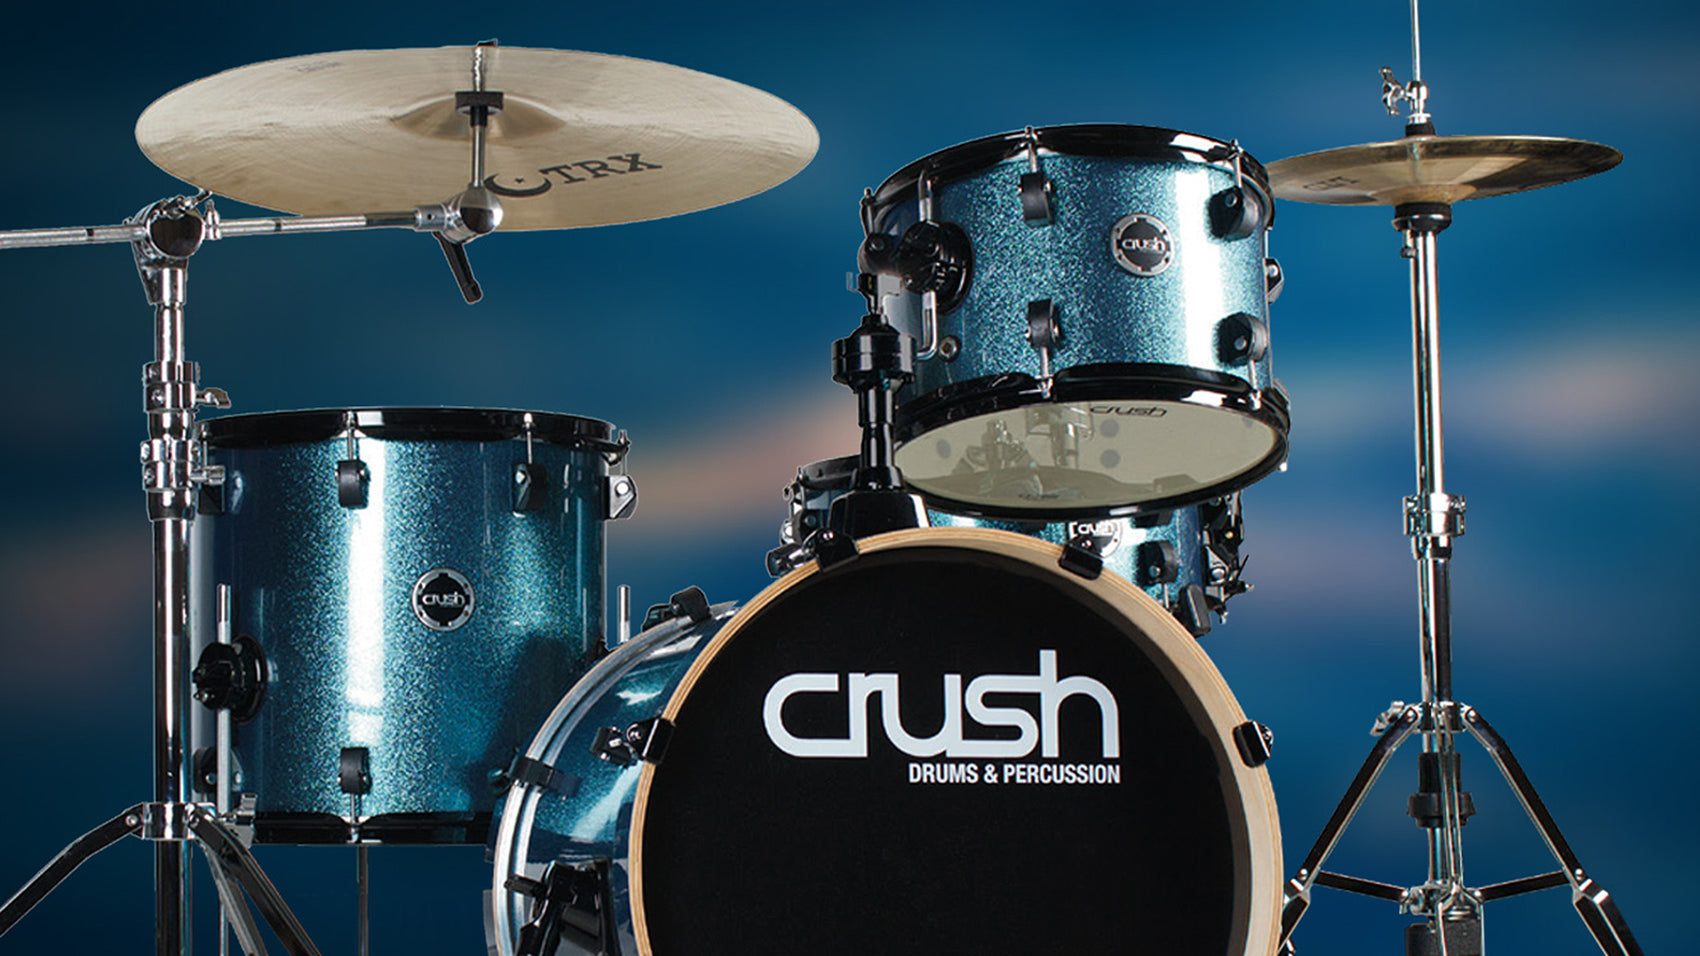 Now Available - Crush Drums